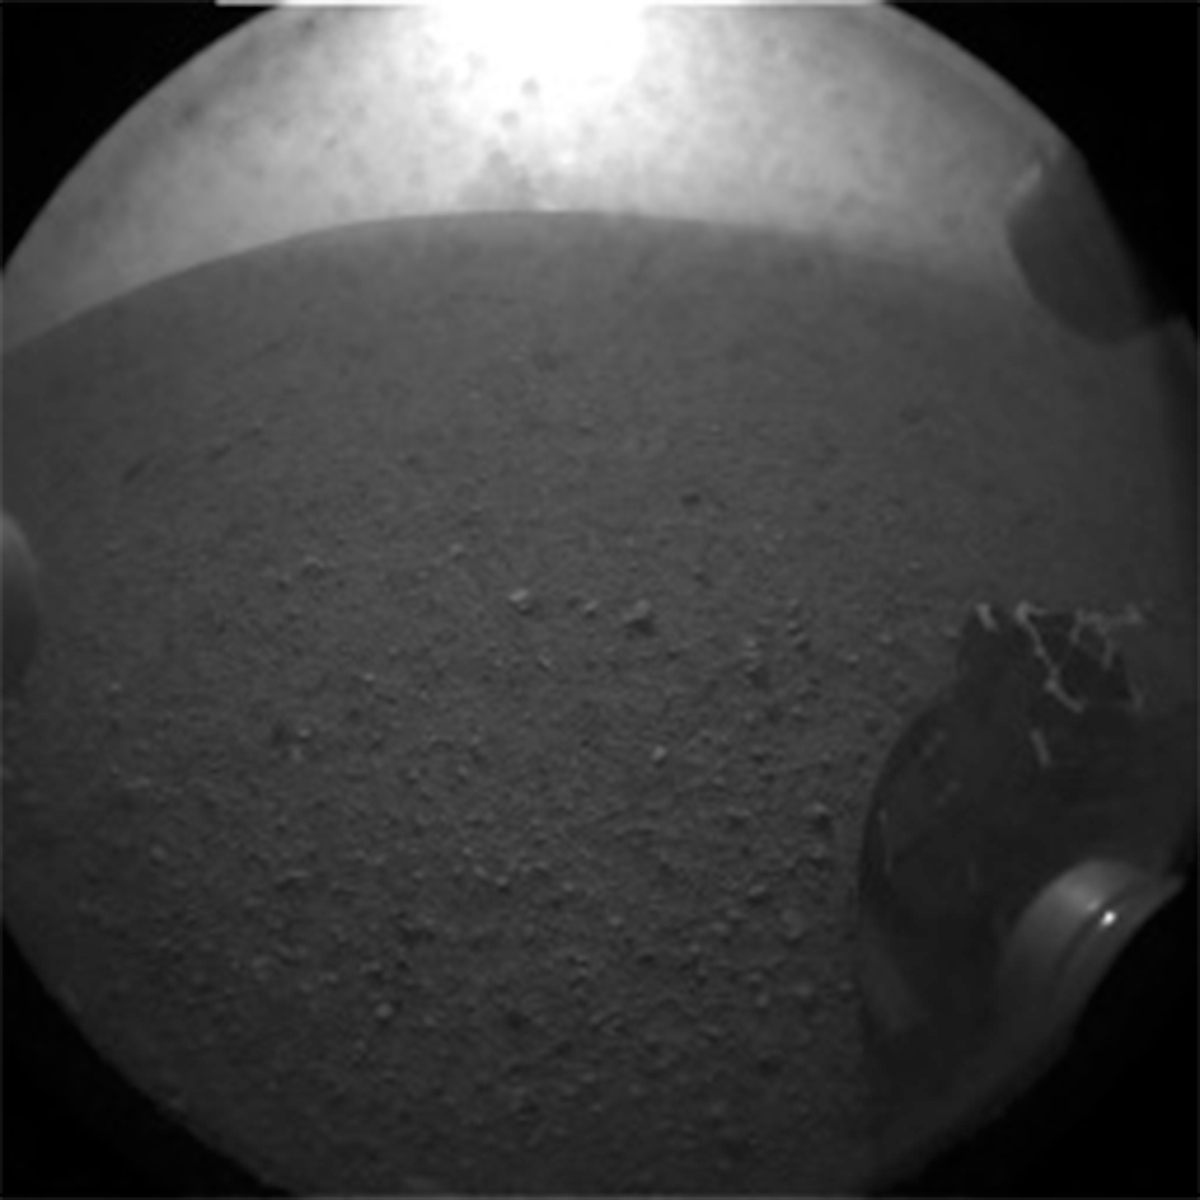 This image was taken by the Rear Hazard Avoidance Camera (Rear Hazcam) onboard NASA's Mars rover Curiosity on Sol 0 (2012-08-06 05:18:38 UTC) with the dust cover still on the camera, and the right image was taken by the Rear Hazard Avoidance Camera (Rear Hazcam) onboard NASA's Mars rover Curiosity on Sol 3553 (2022-08-04 21:34:03 UTC) and thus the newest one available today.